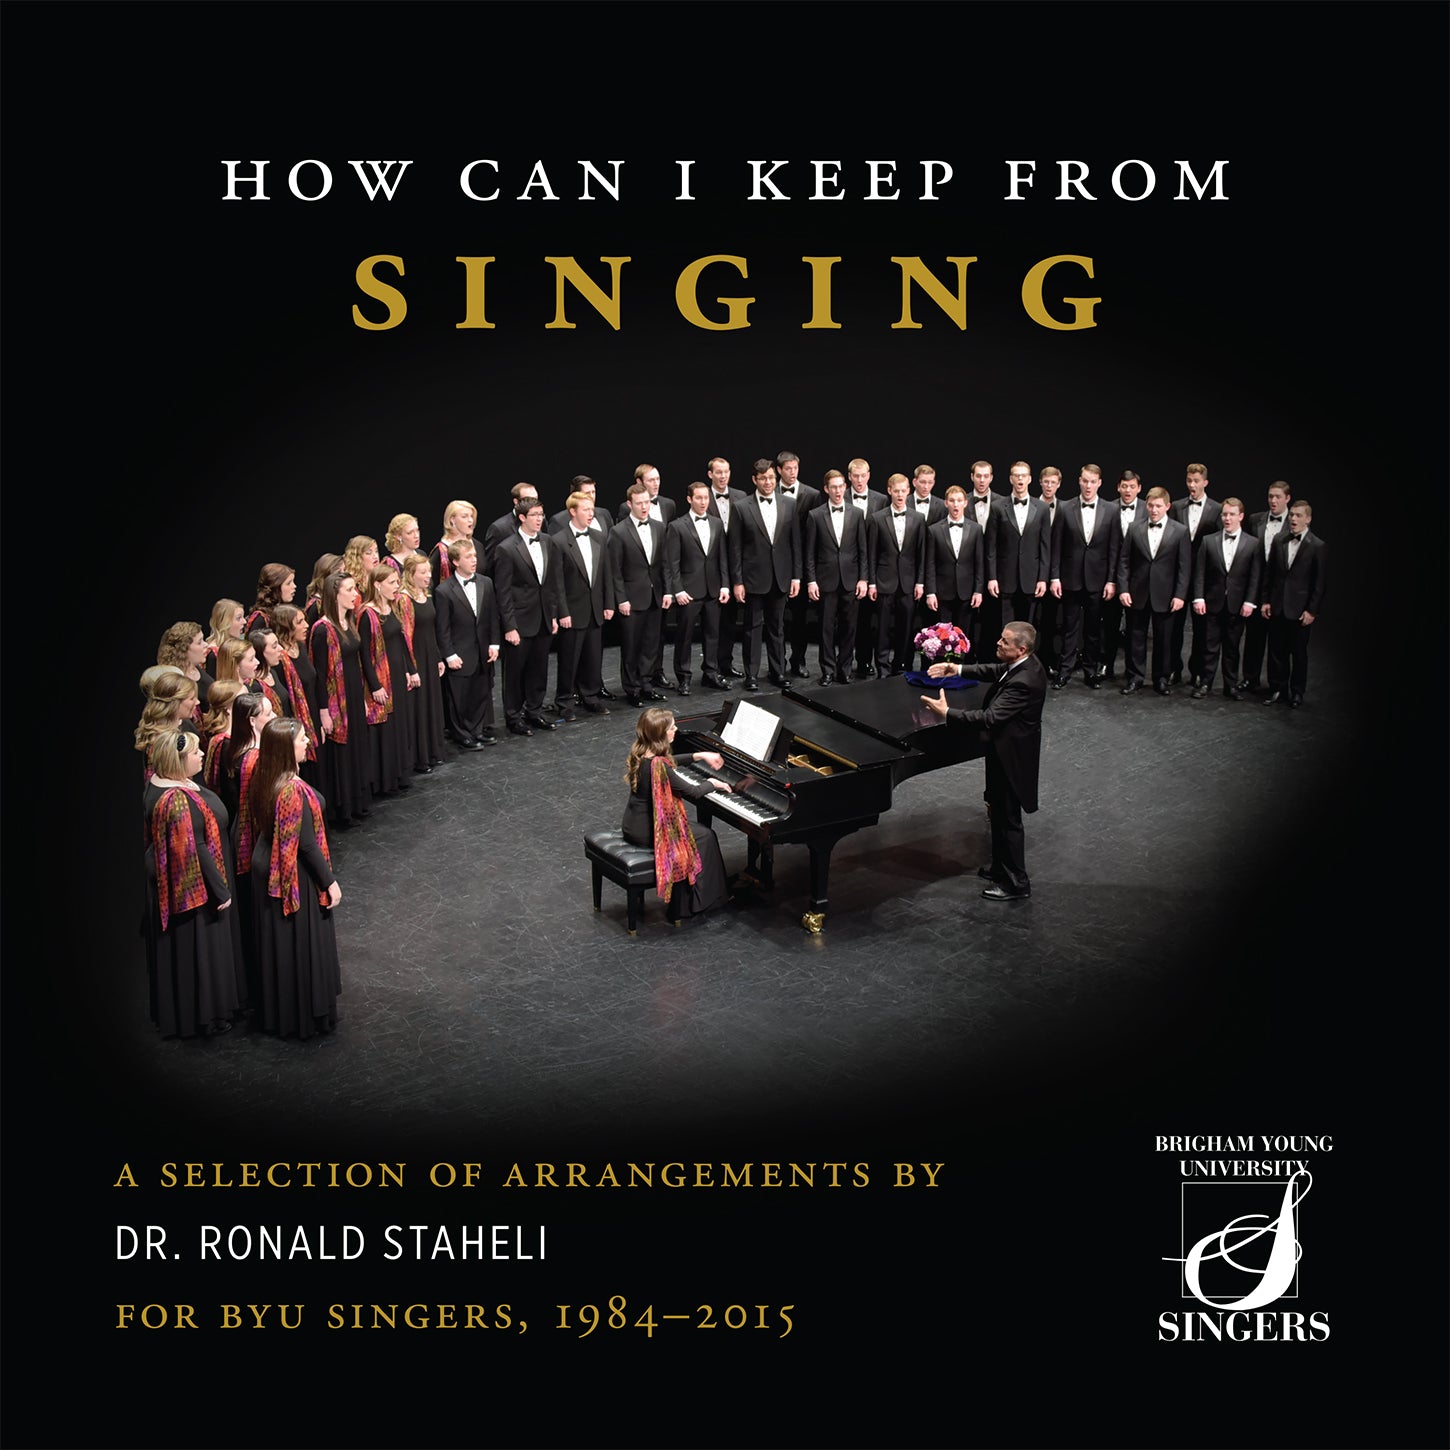 How Can I Keep from Singing: A Selection of Arrangements by Dr. Ronald Staheli for BYU Singers, 1984–2015